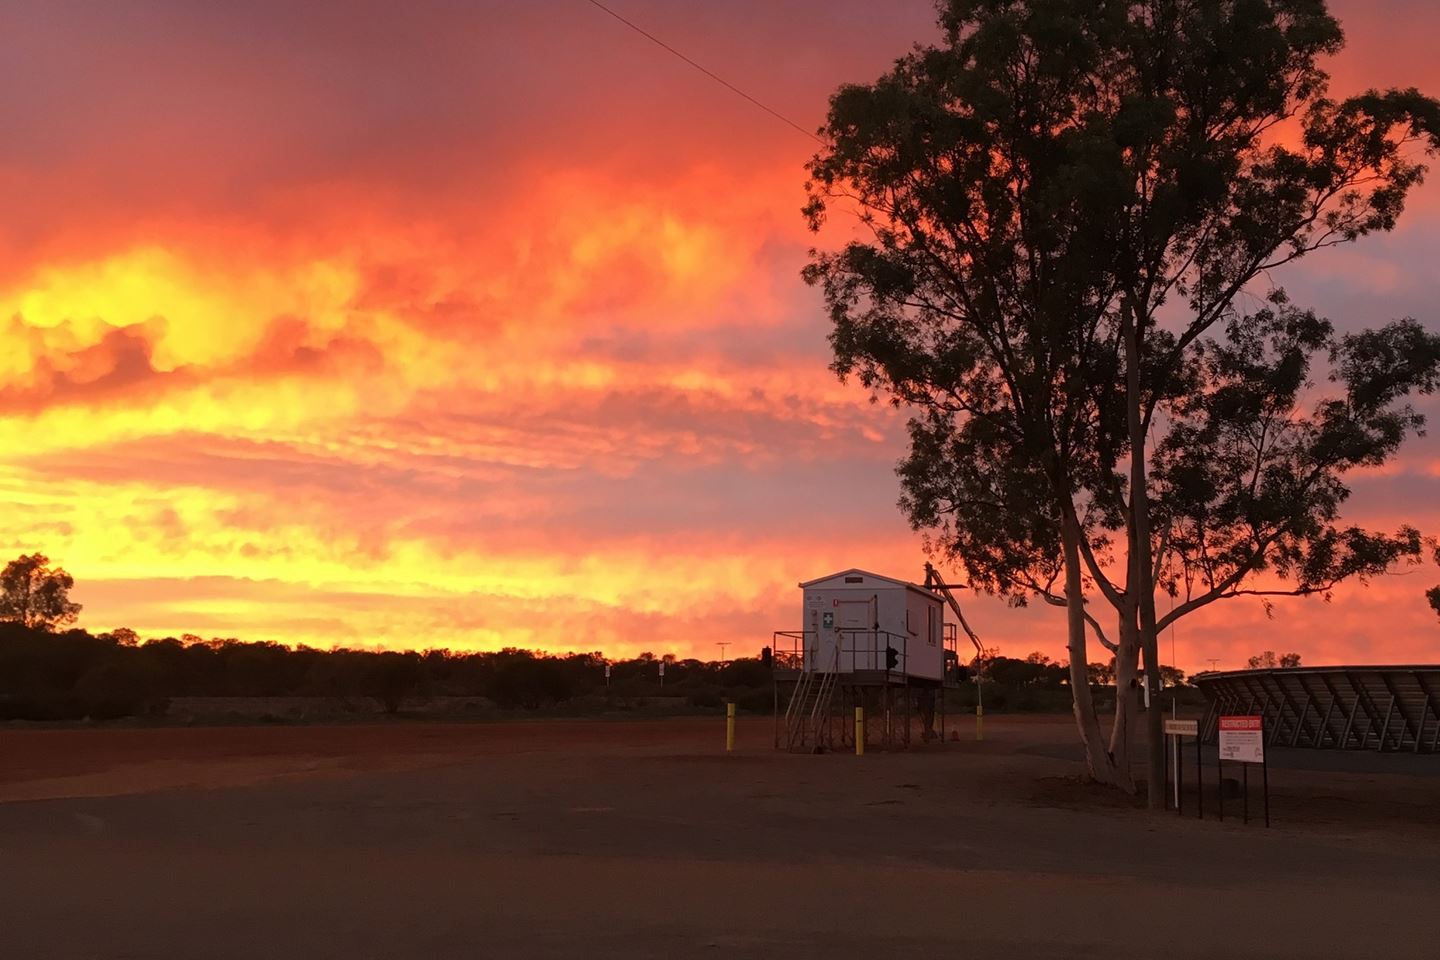 Sunset panorama at Coorow site with gumtree, sample hut and open bulkhead